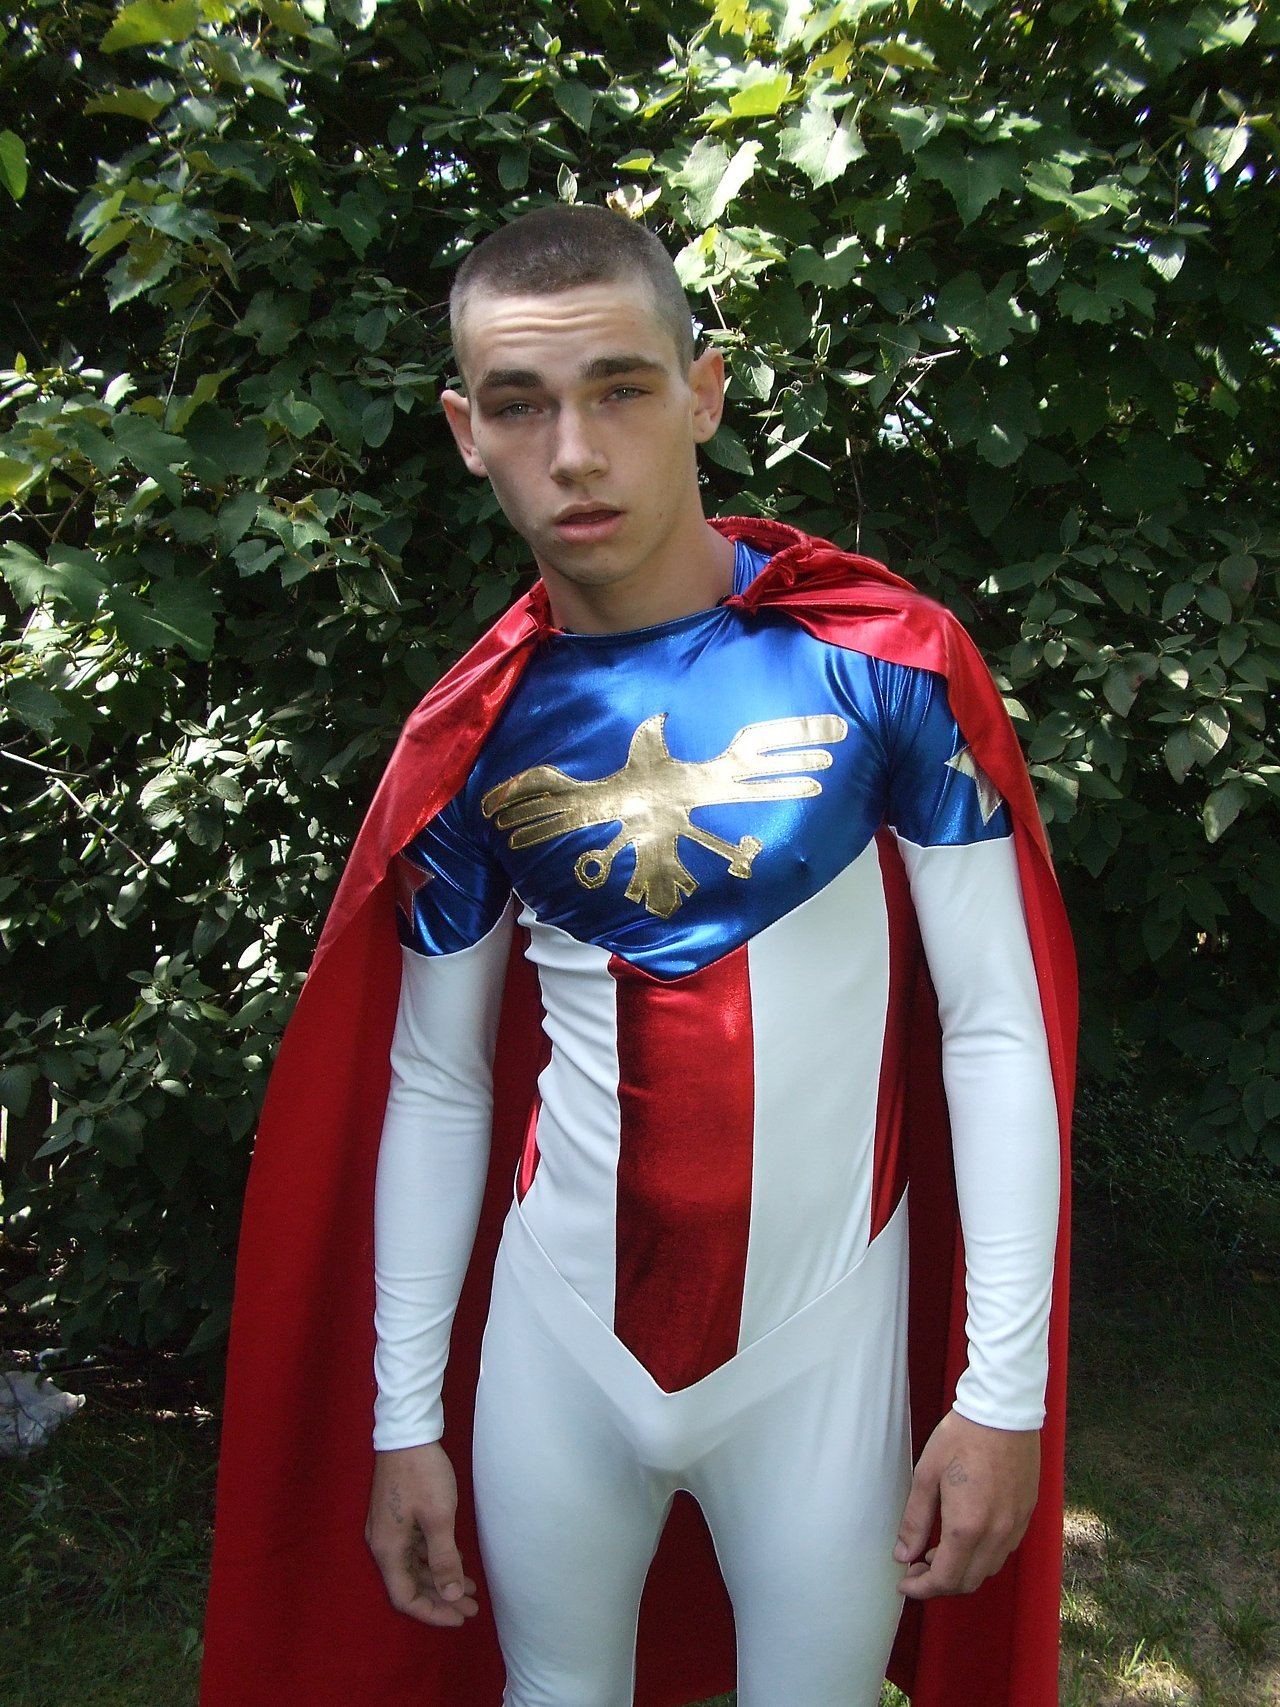 Patriotic young American superhero confronted by a hypno-villain and is reduced to